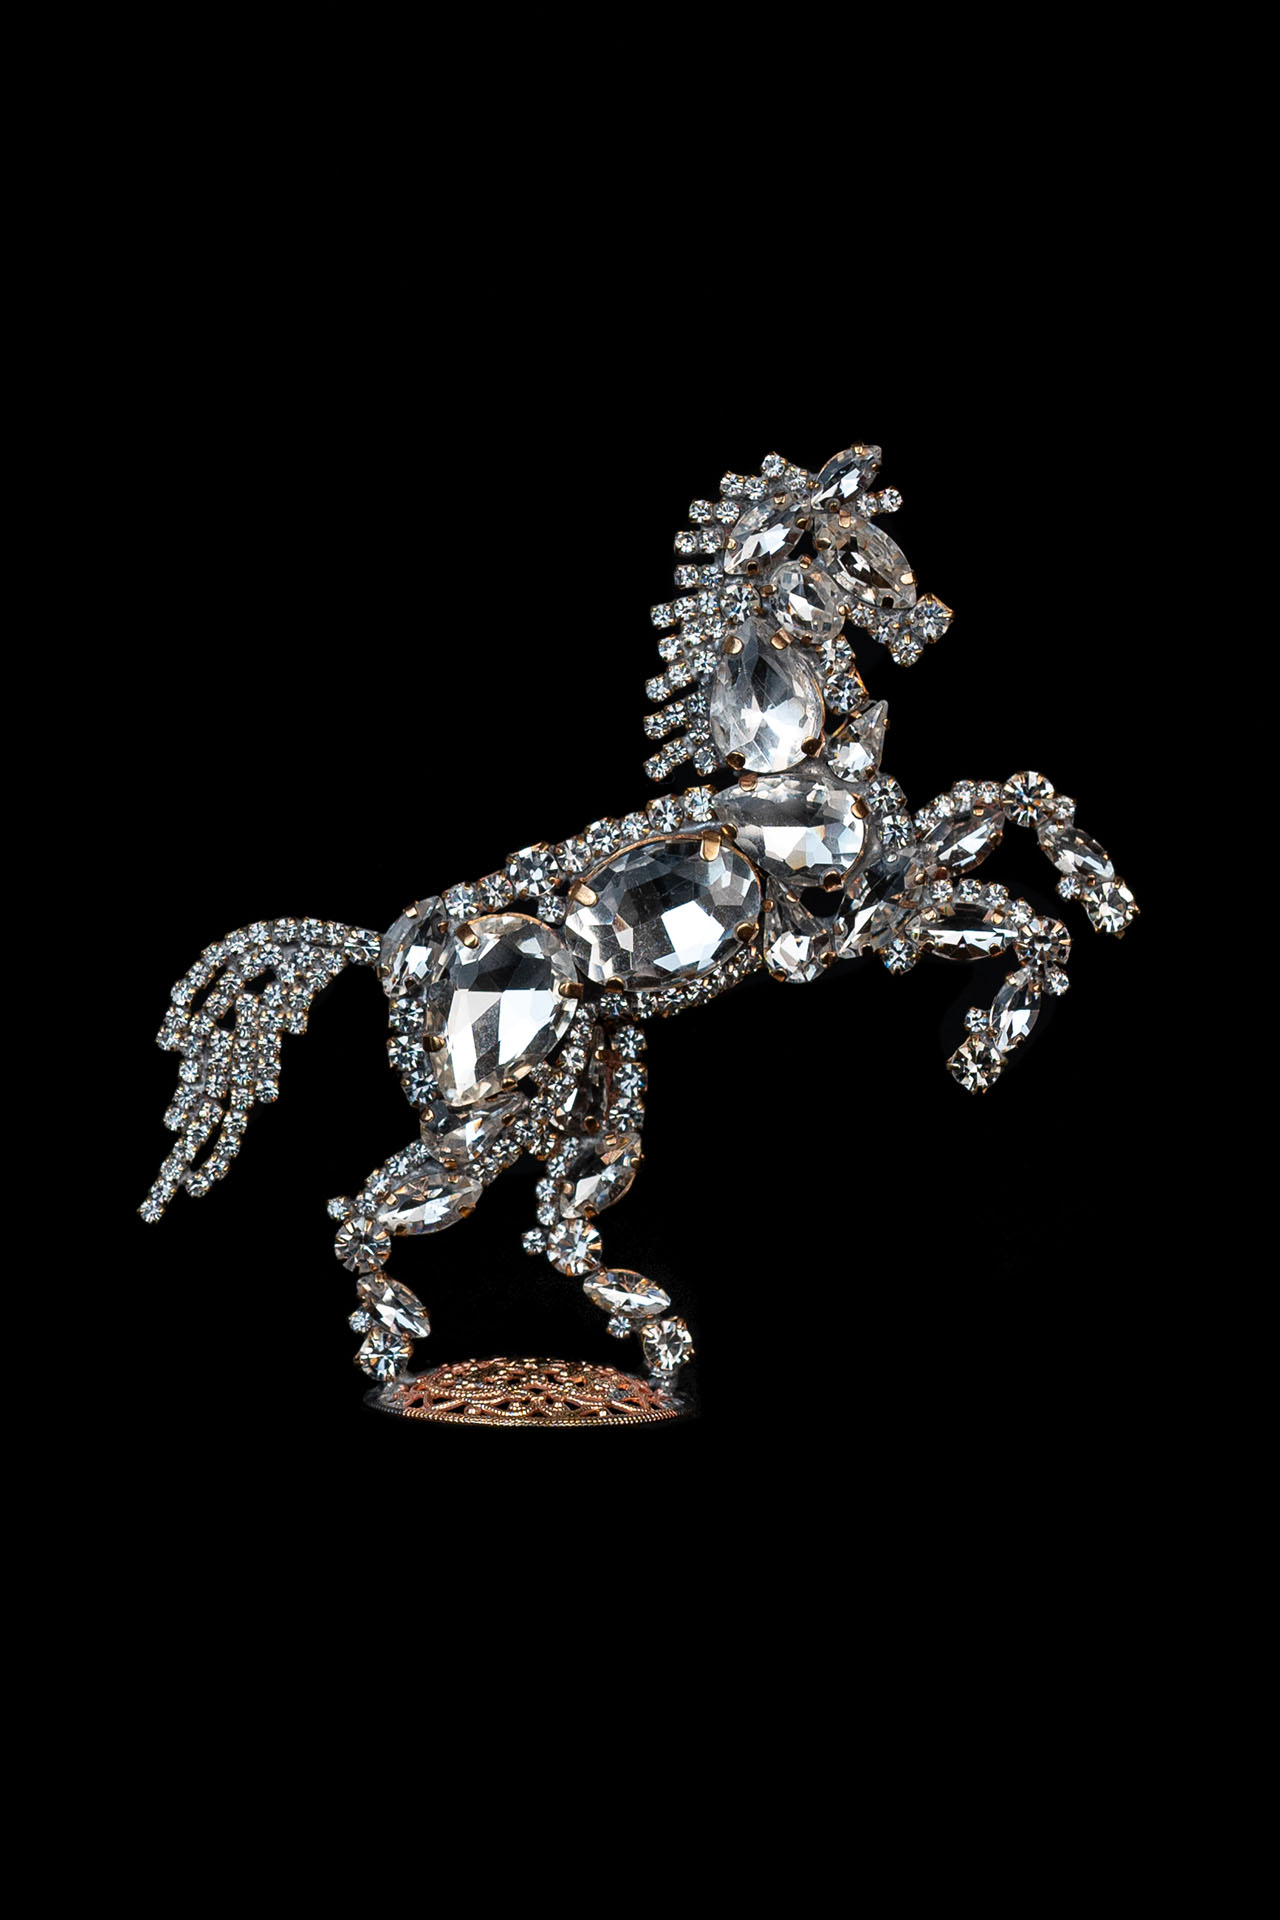 Small horse decor statue made from crystal clear rhinestones